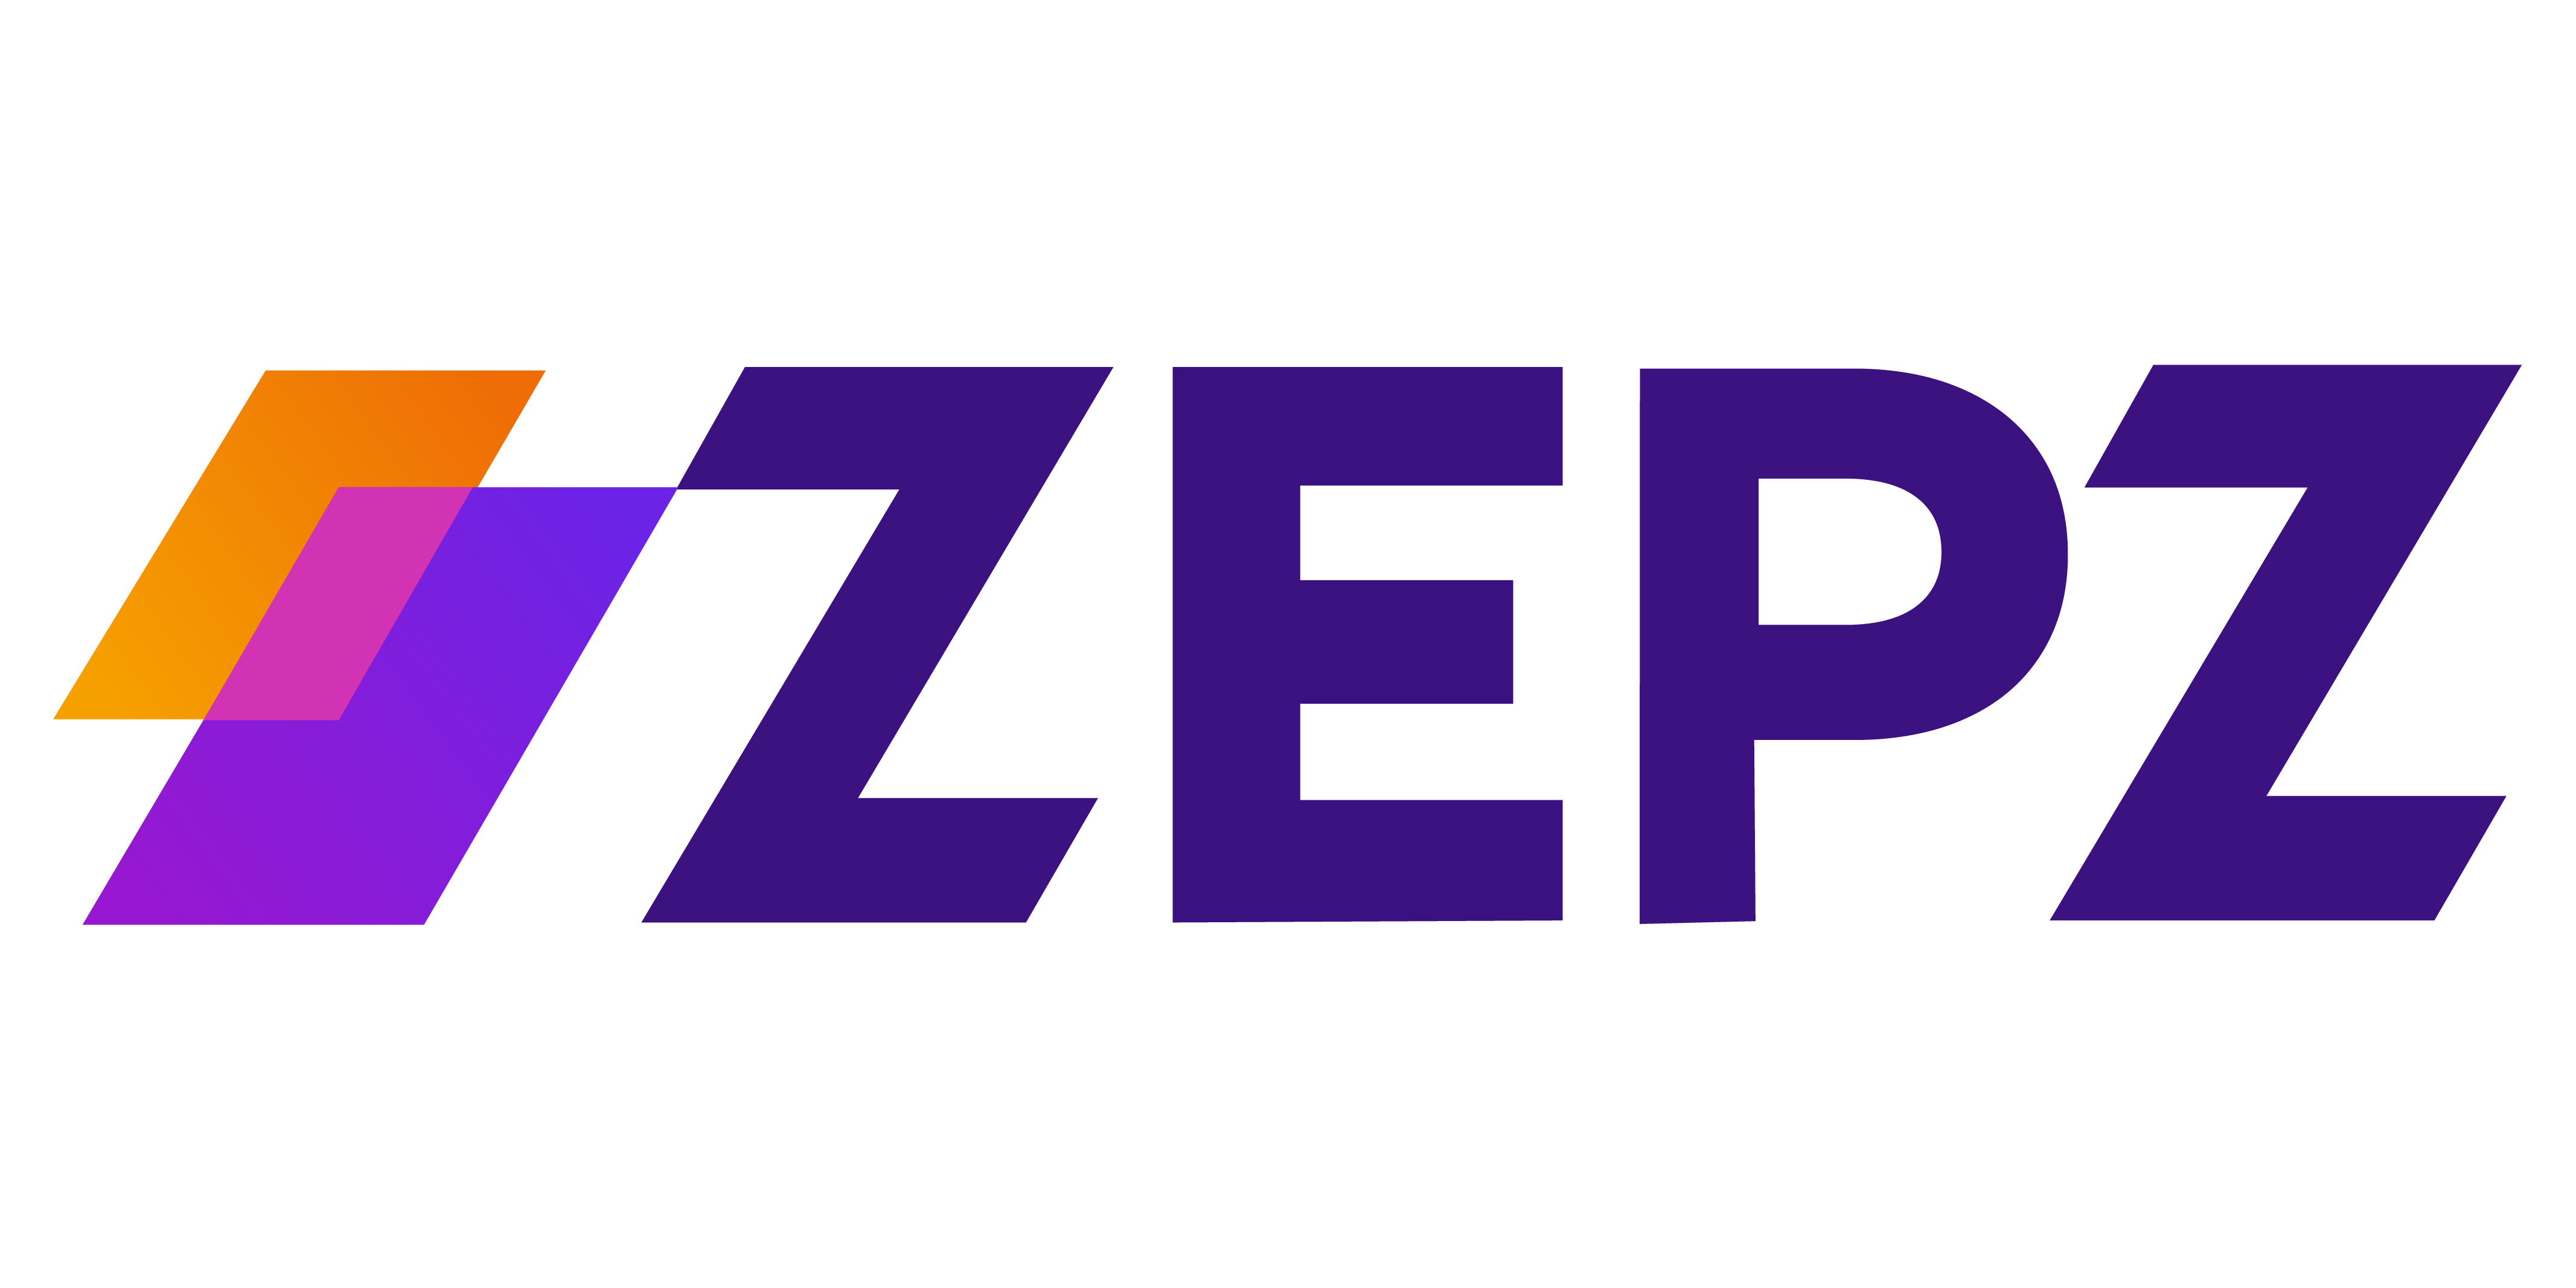 Jobs at Zepz